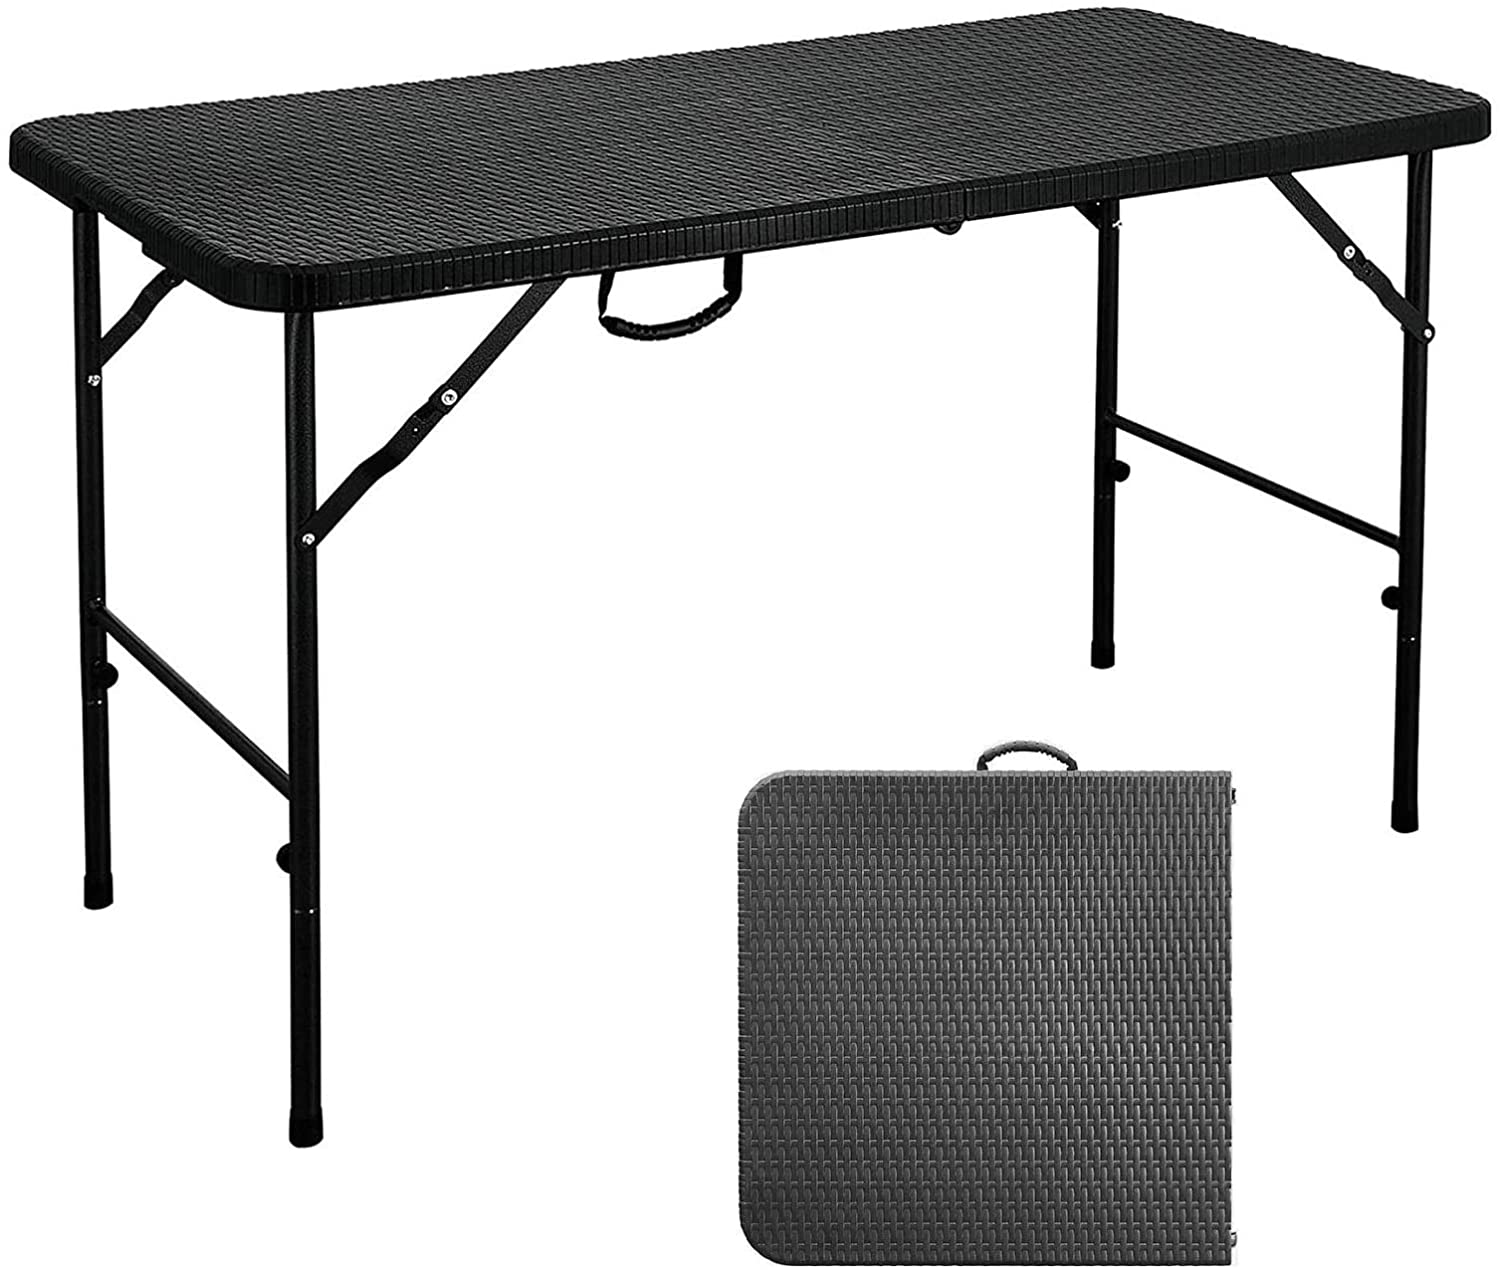 Photo 1 of Folding Table Small Portable Foldable Table with Carrying Handle 4 Ft Black Square Plastic Faux Rattan FoldinHalf Camping Picnic Table Fold Up Computer Table for Game Lightweight Only 17lbs